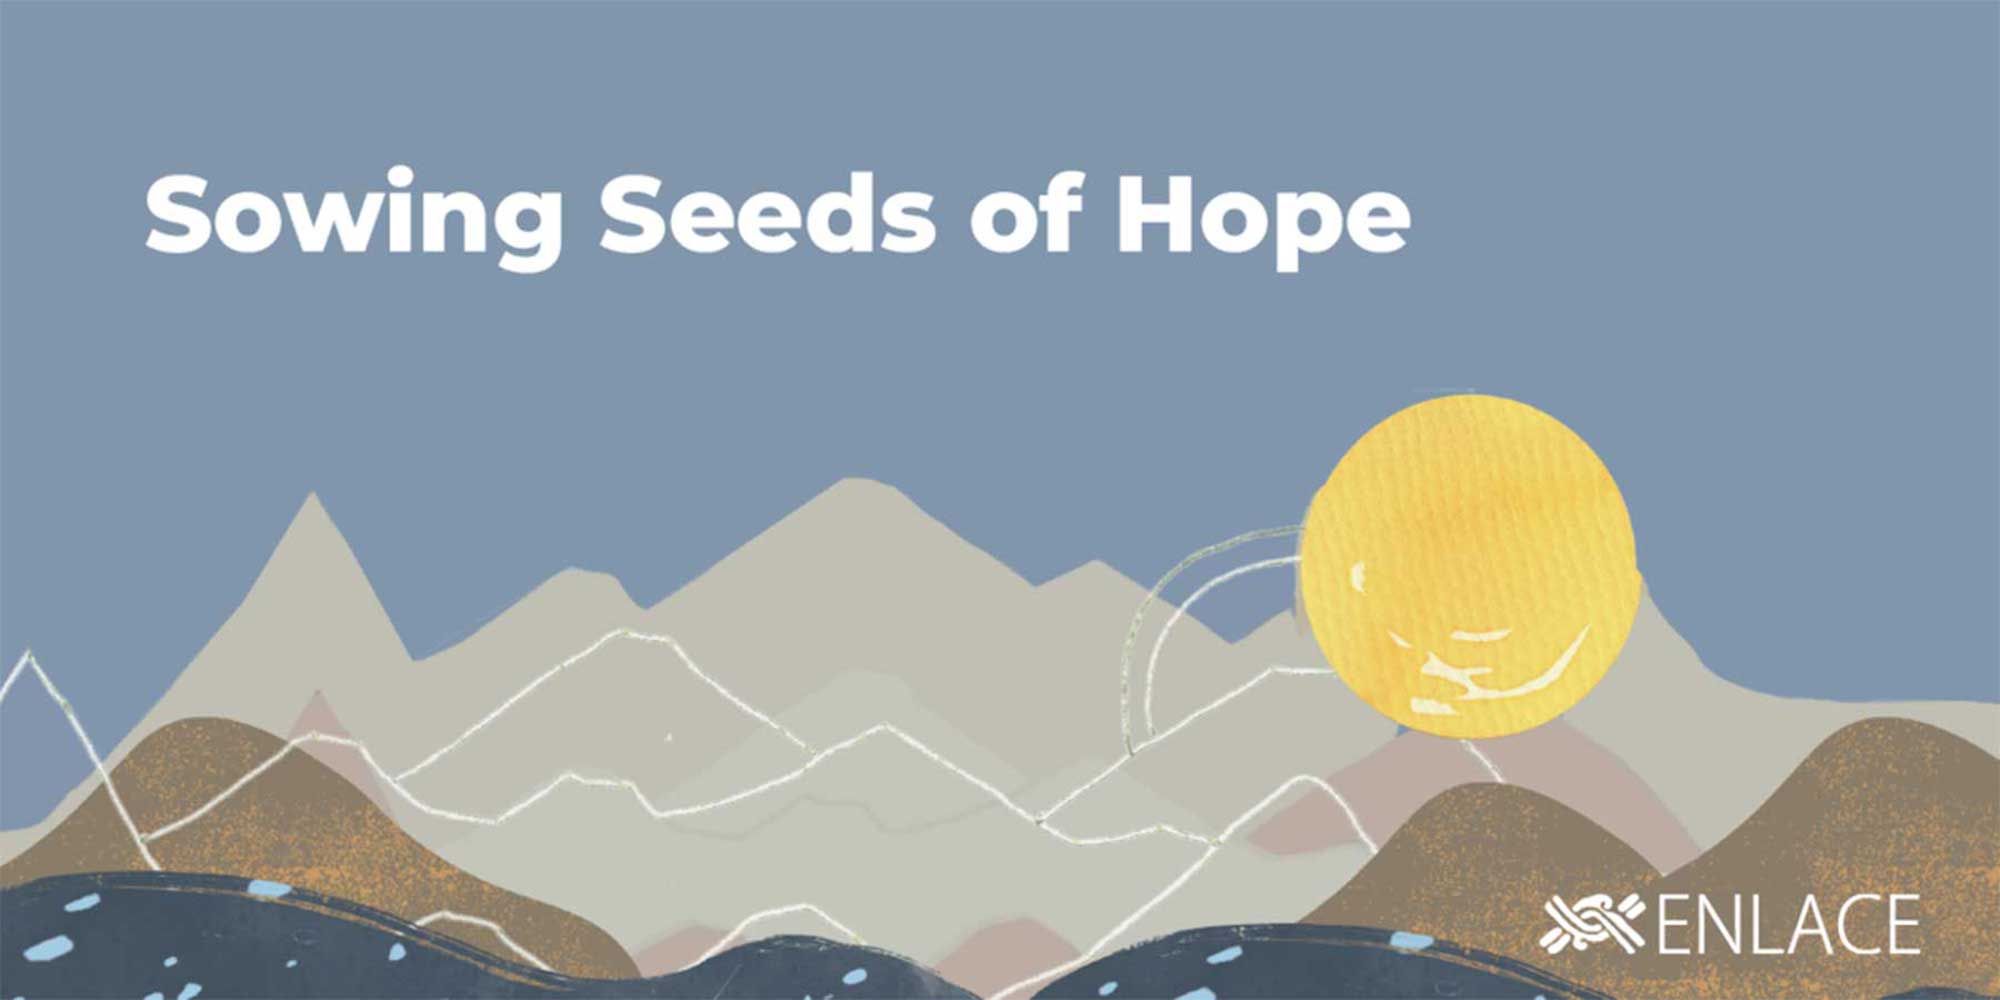 SOWING SEEDS OF HOPE